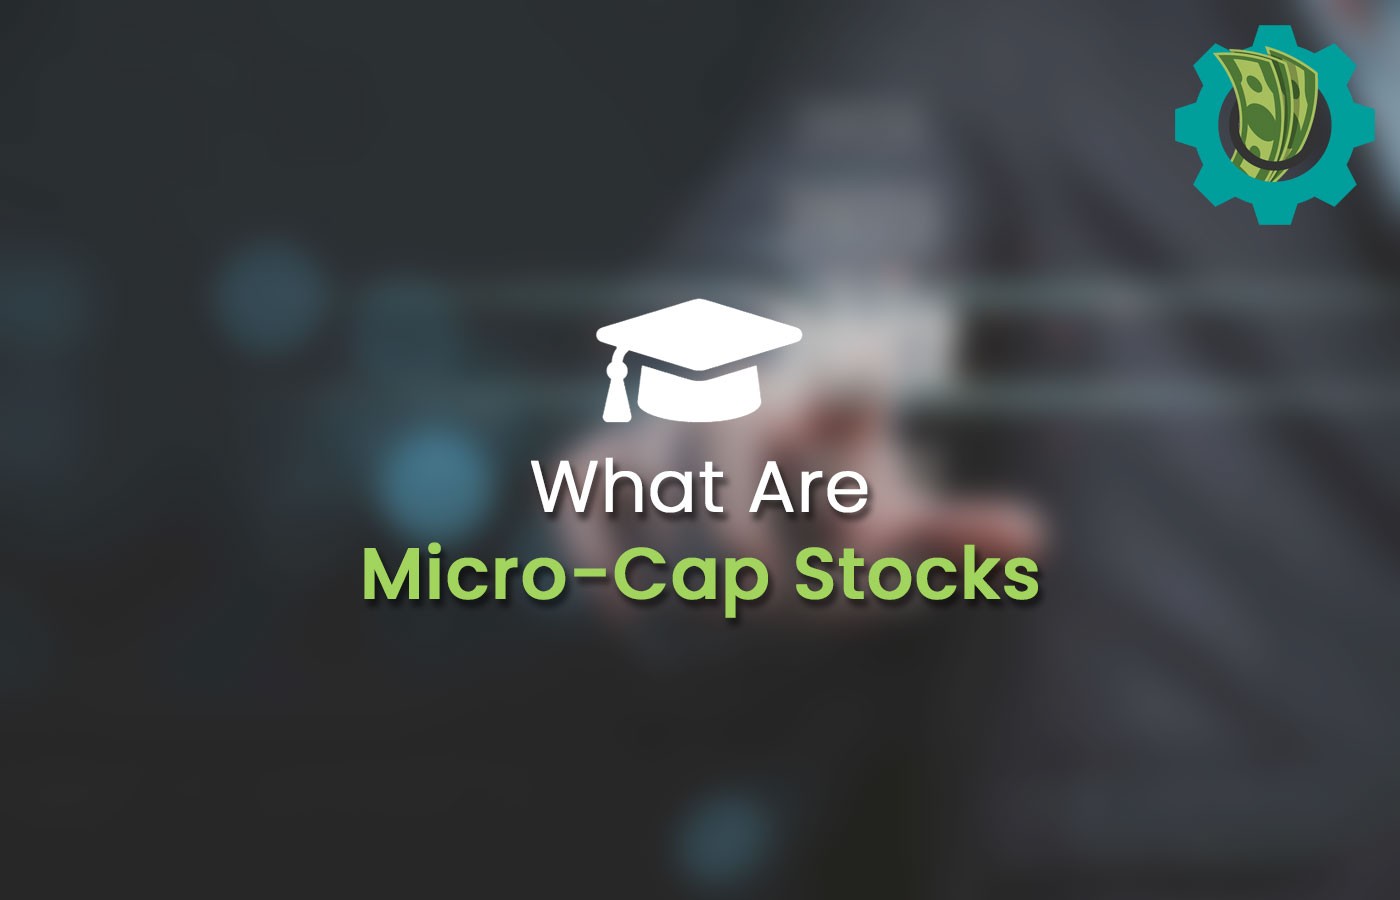 Investor deciding whether to invest in micro-cap stocks